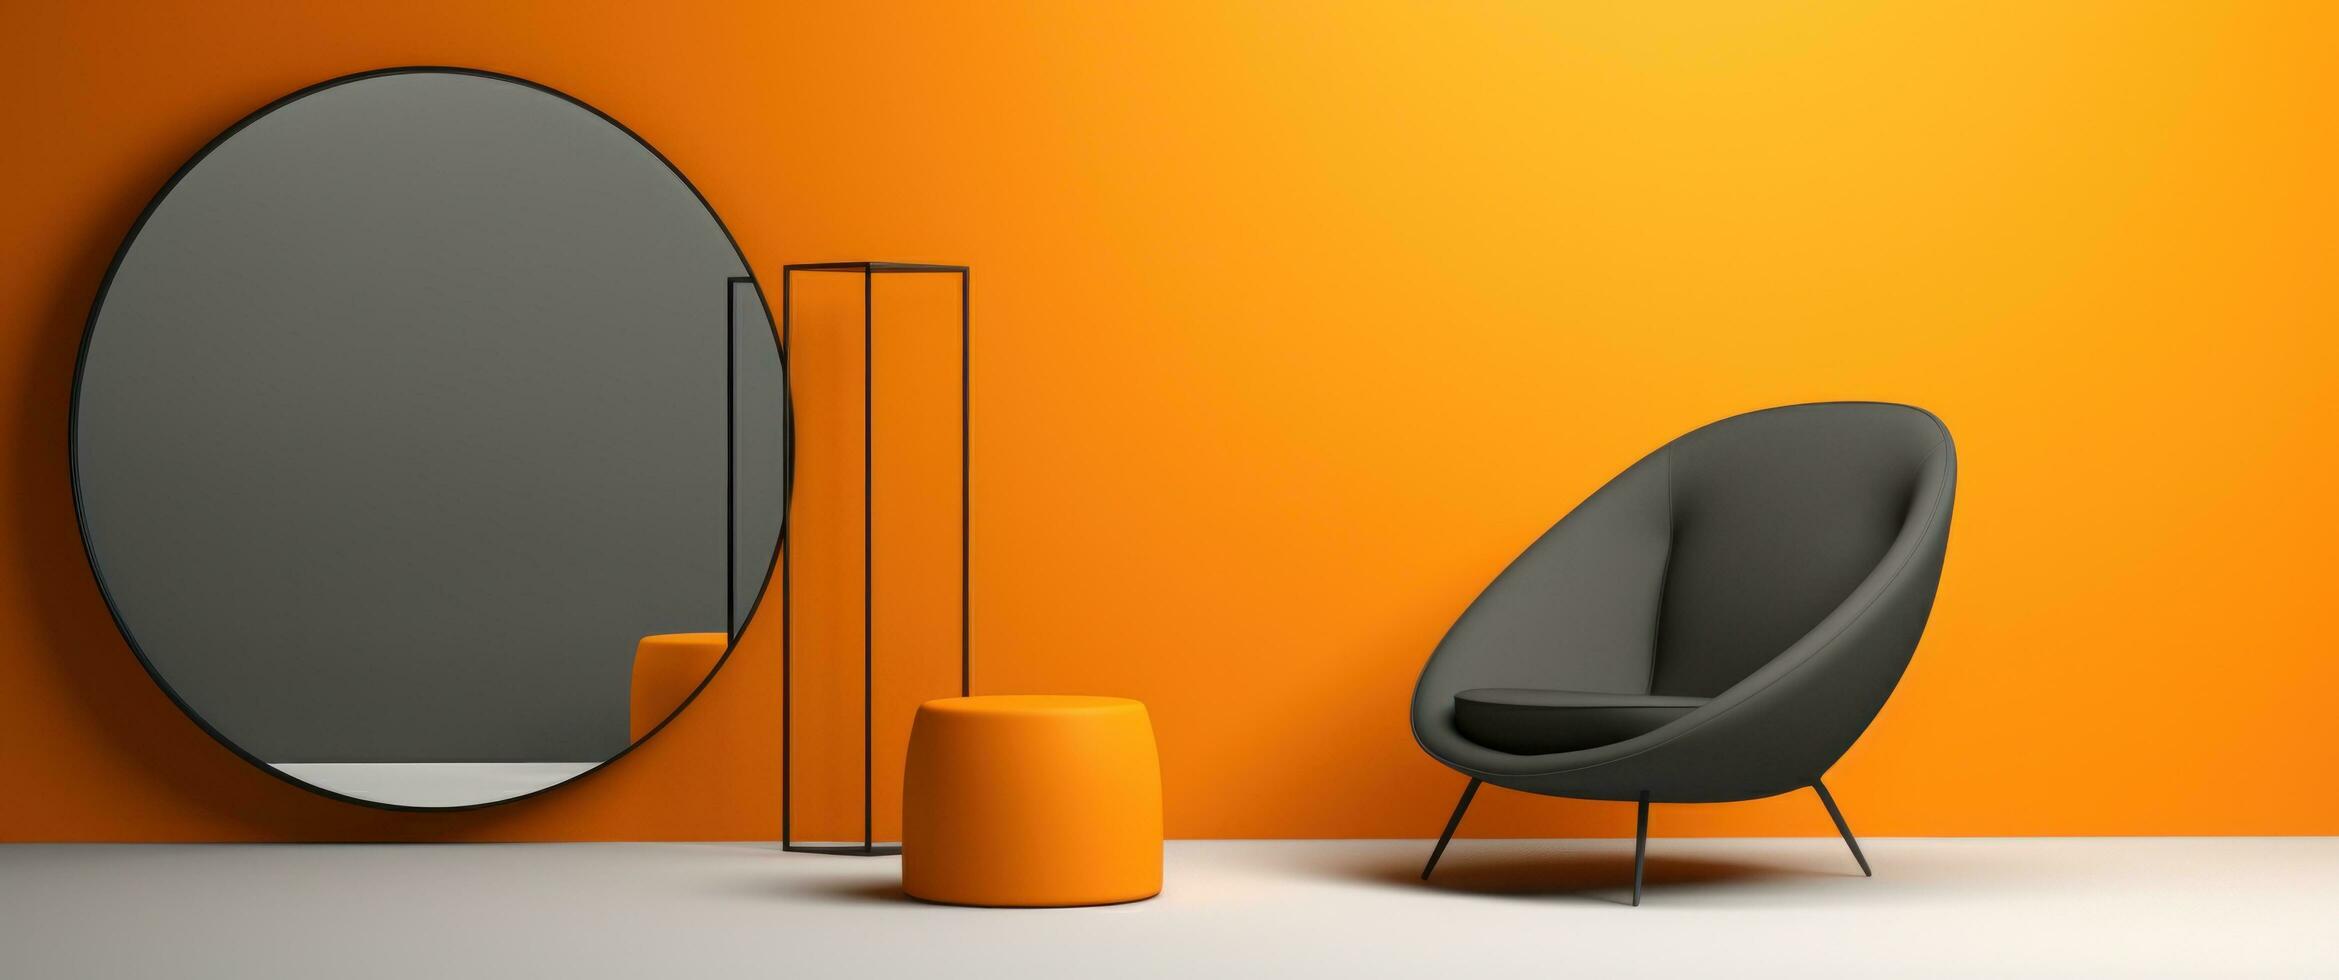 AI generated a large grey mirror is sitting in front of an orange chair photo